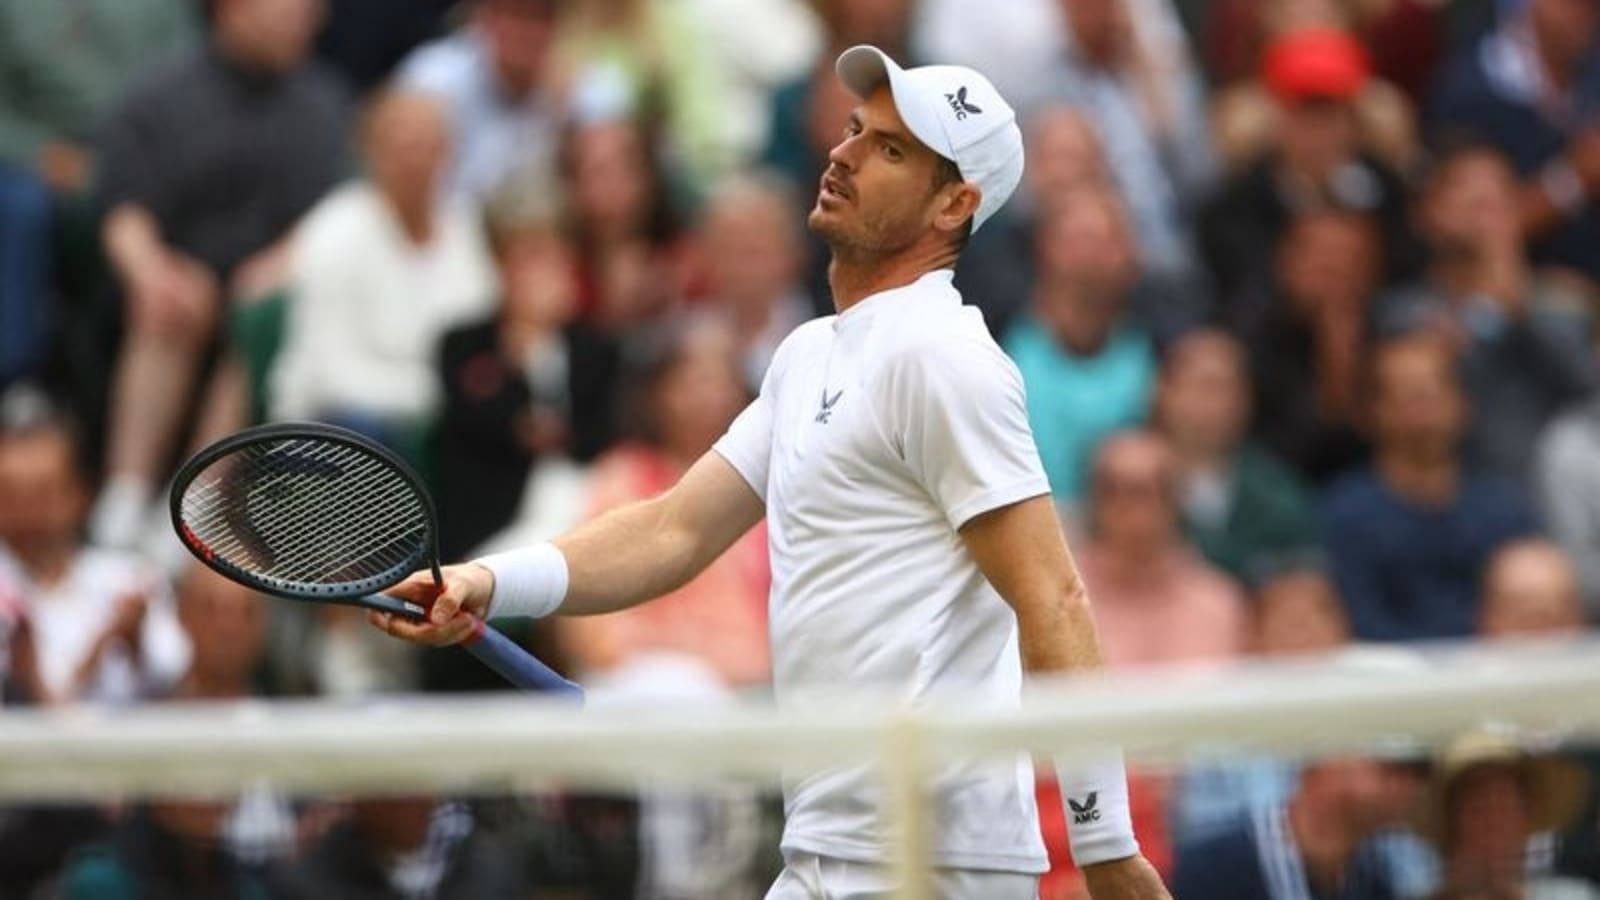 Two-time Wimbledon champ Andy Murray loses to Isner in 2nd round Tennis News